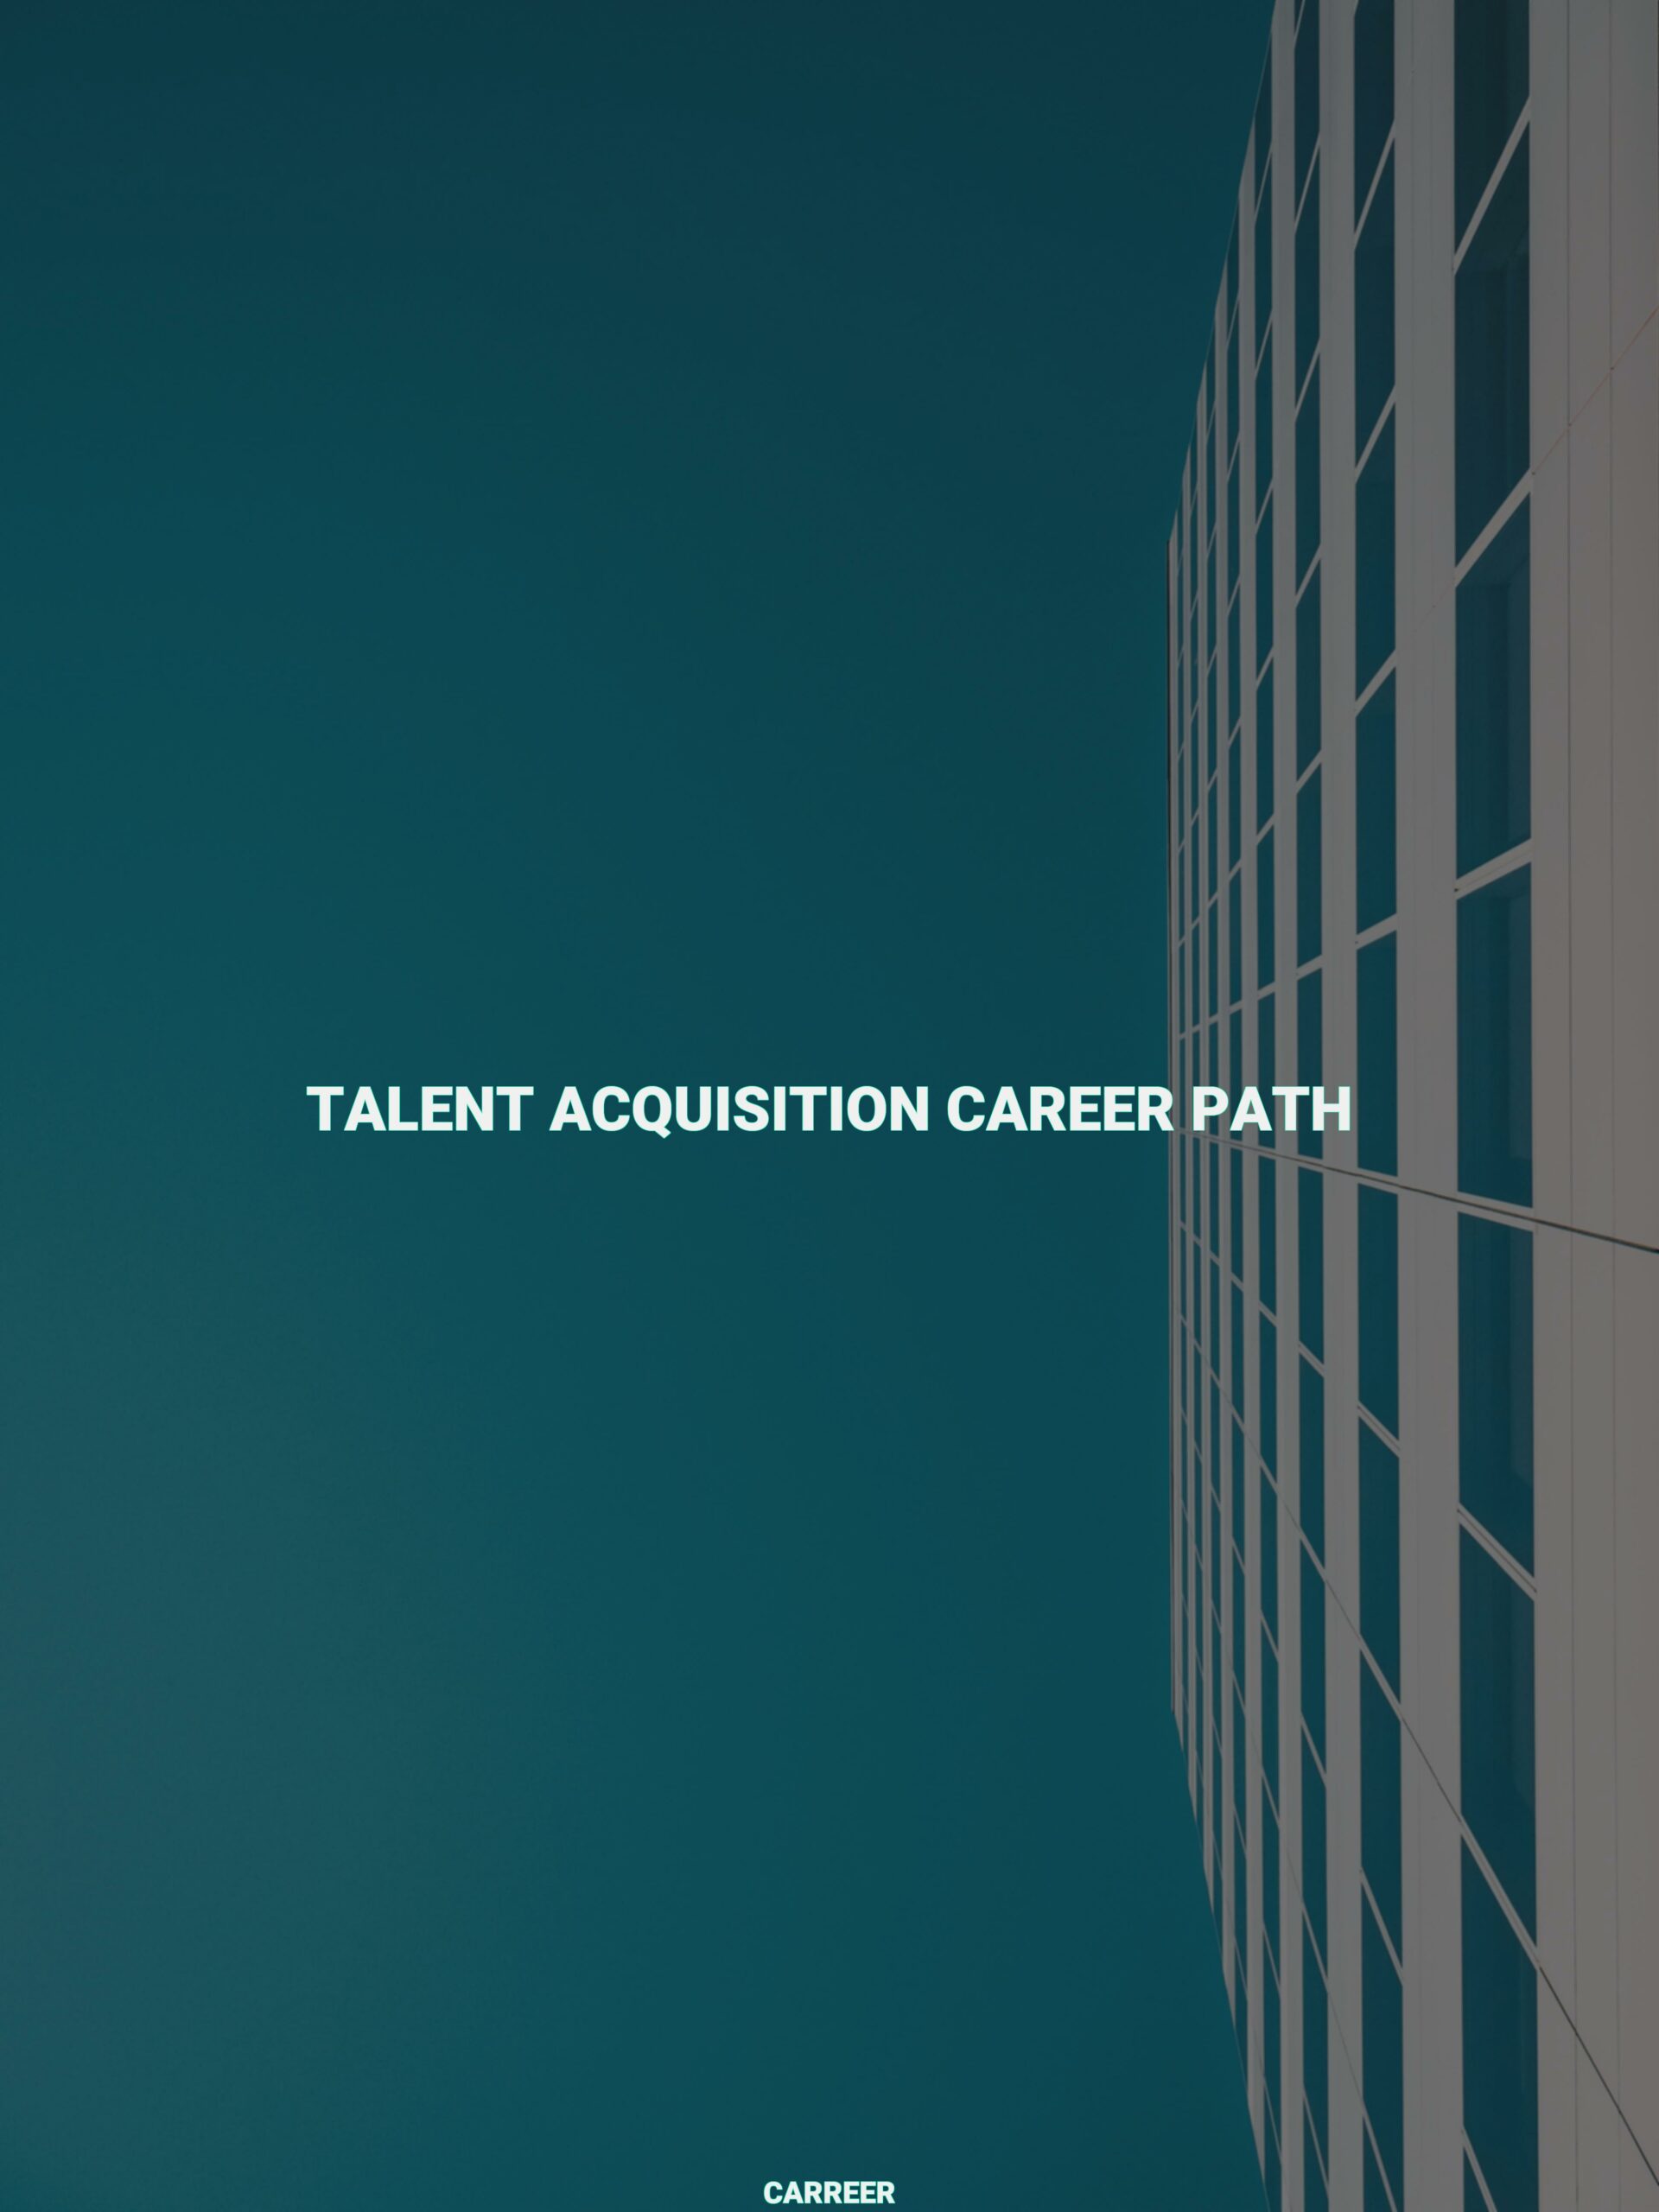 Talent acquisition career path